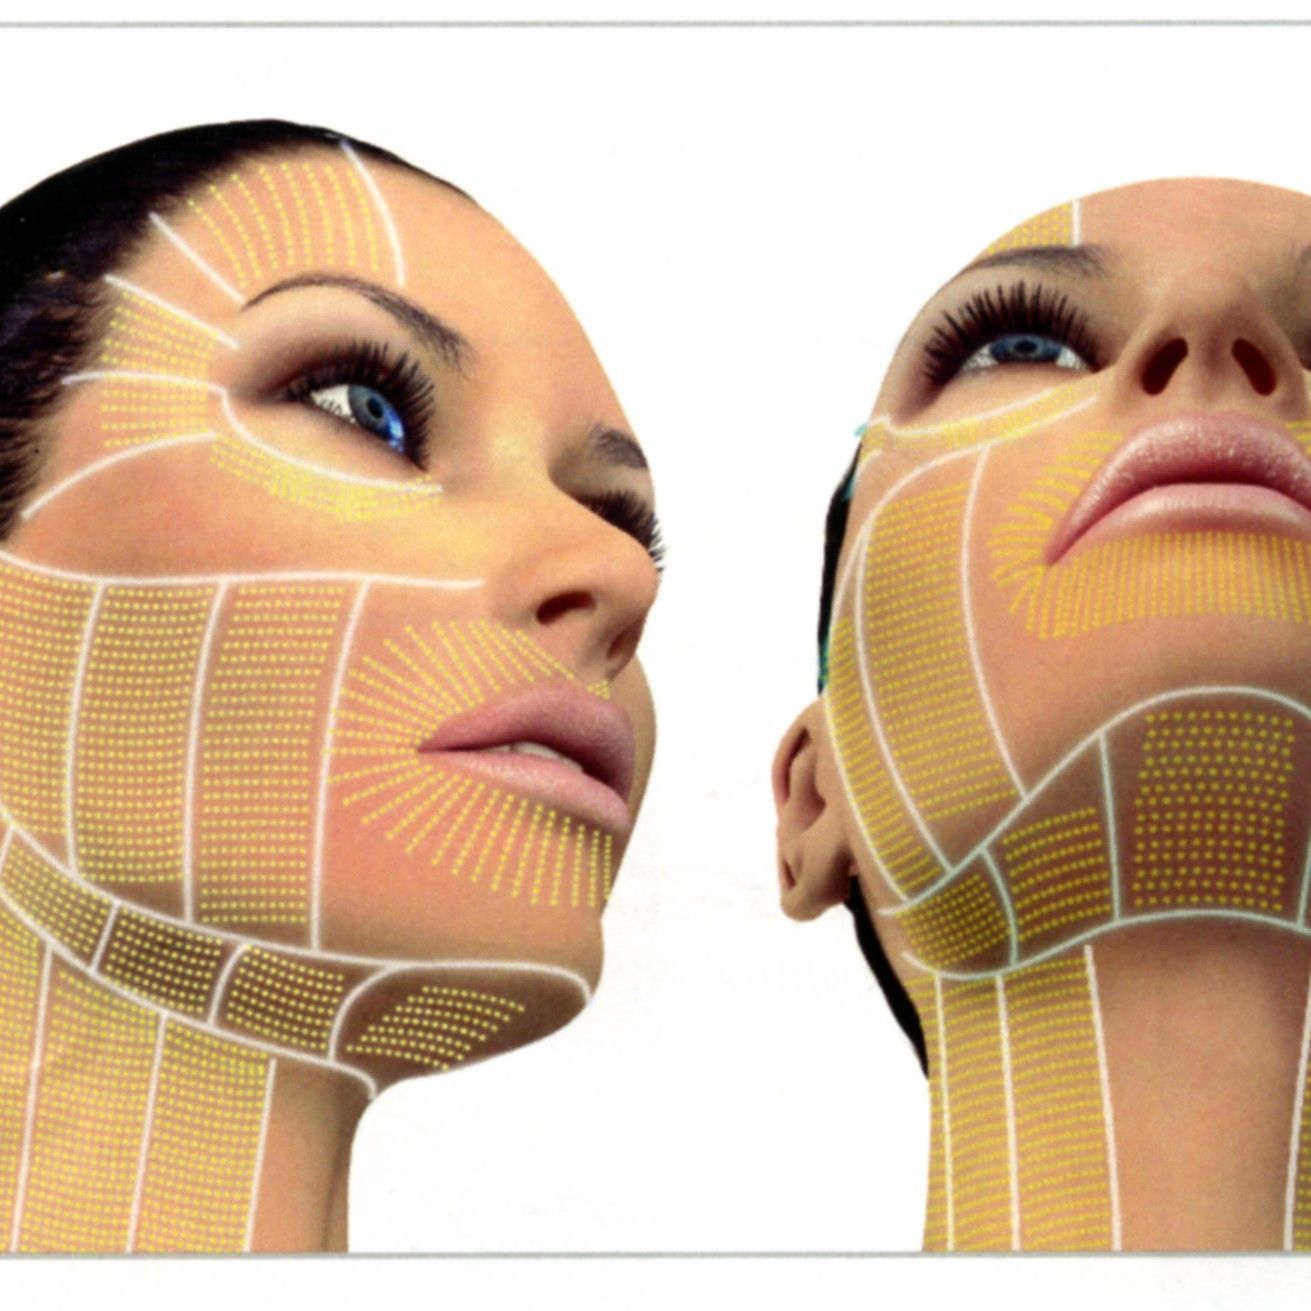 Ultherapy (FULL FACE, NECK, CHEST) portfolio